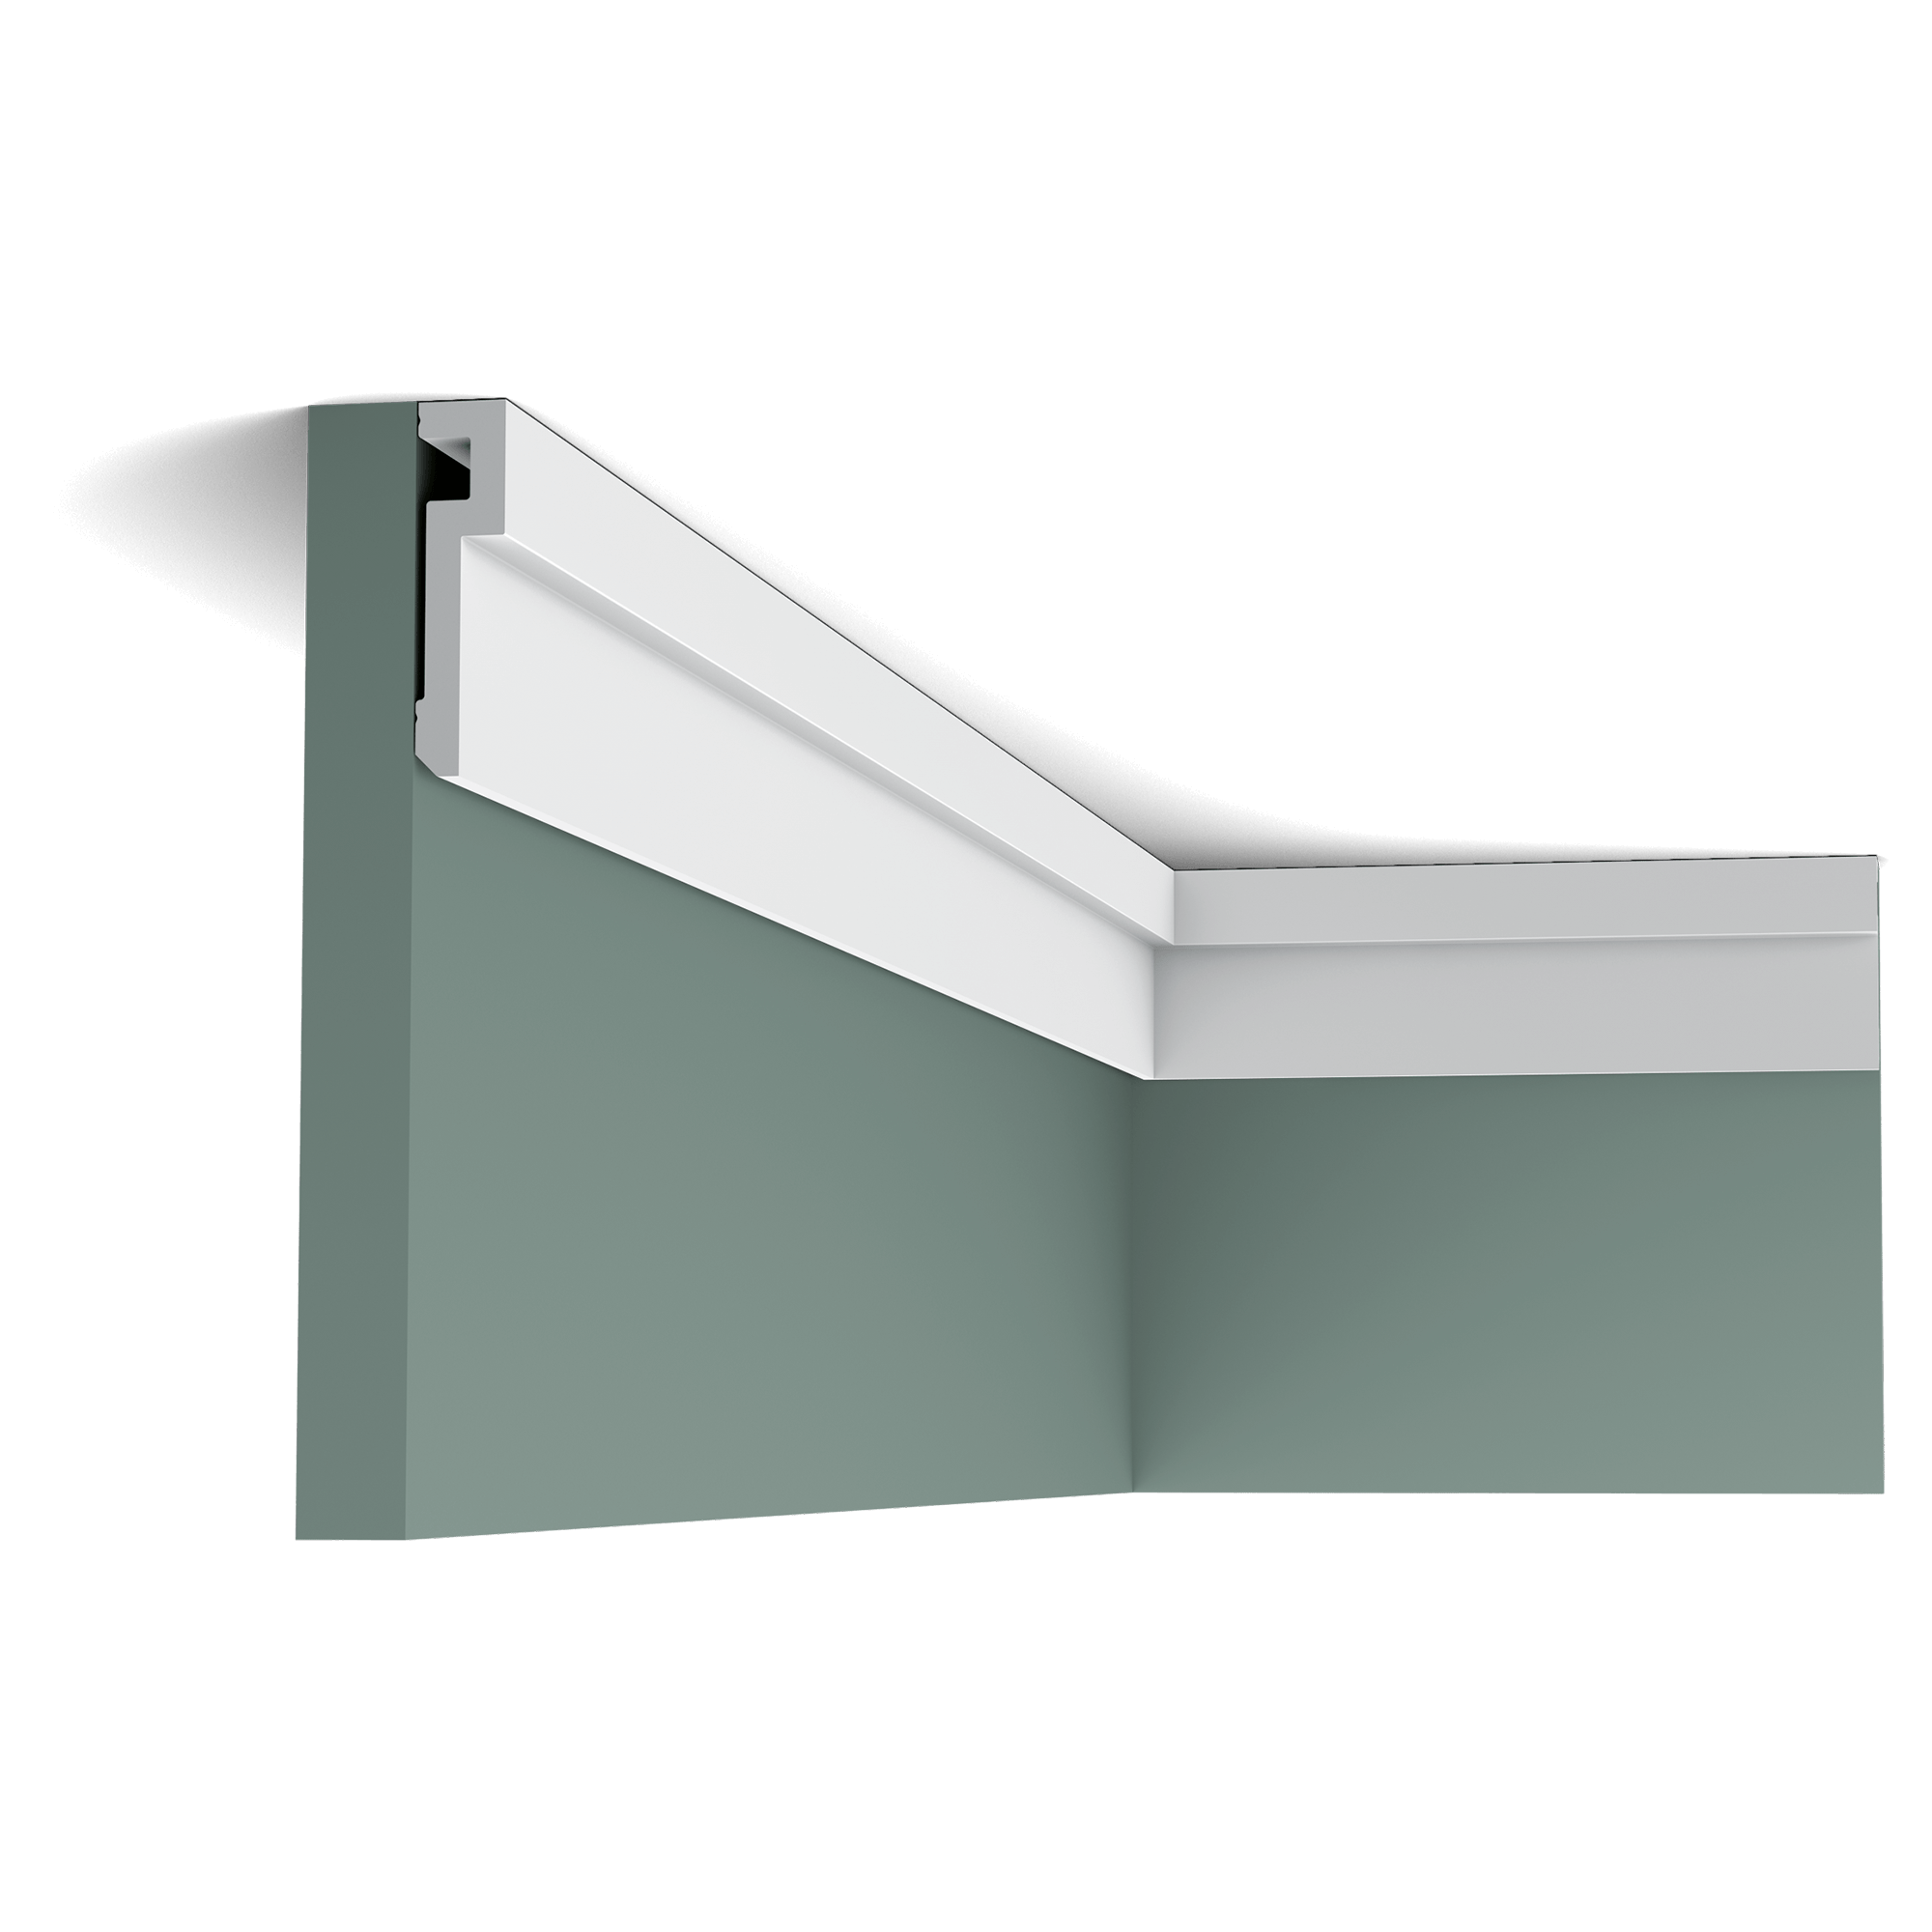 Based on the iconic CX190 U-profile, the U-STEPS take on different shapes with ease. With a limited number of decorative mouldings, you can bring walls and entire interiors to life. The results are always unique. Designed by Orio Tonini.